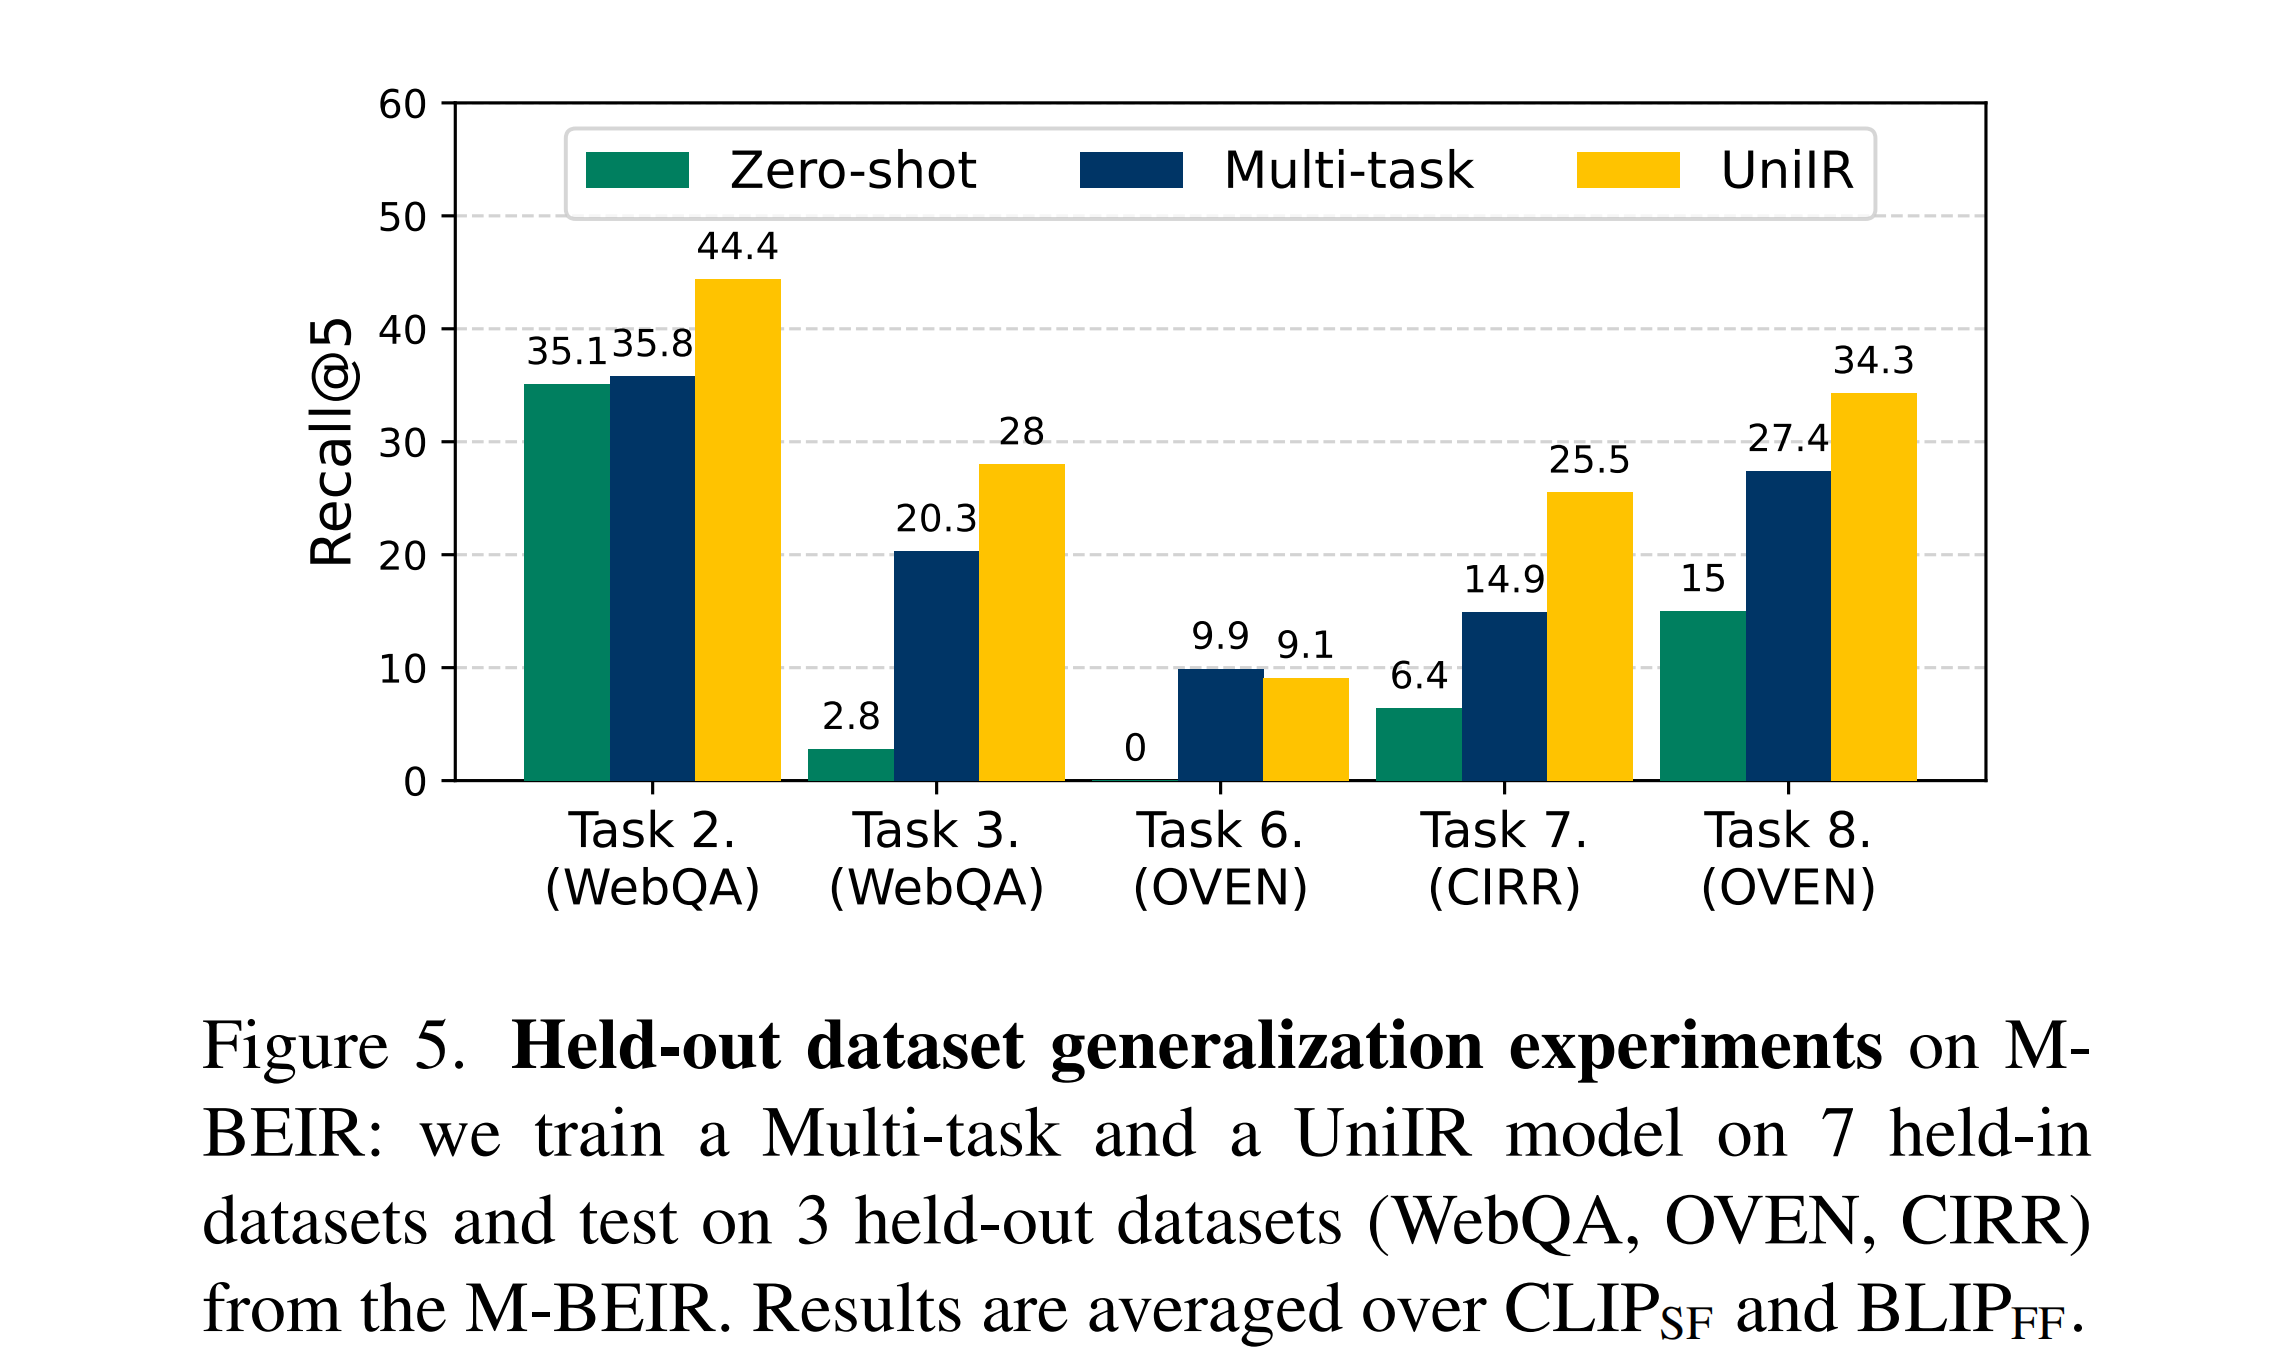 Evaluate UniIR's generalization capability on held-out datasets.